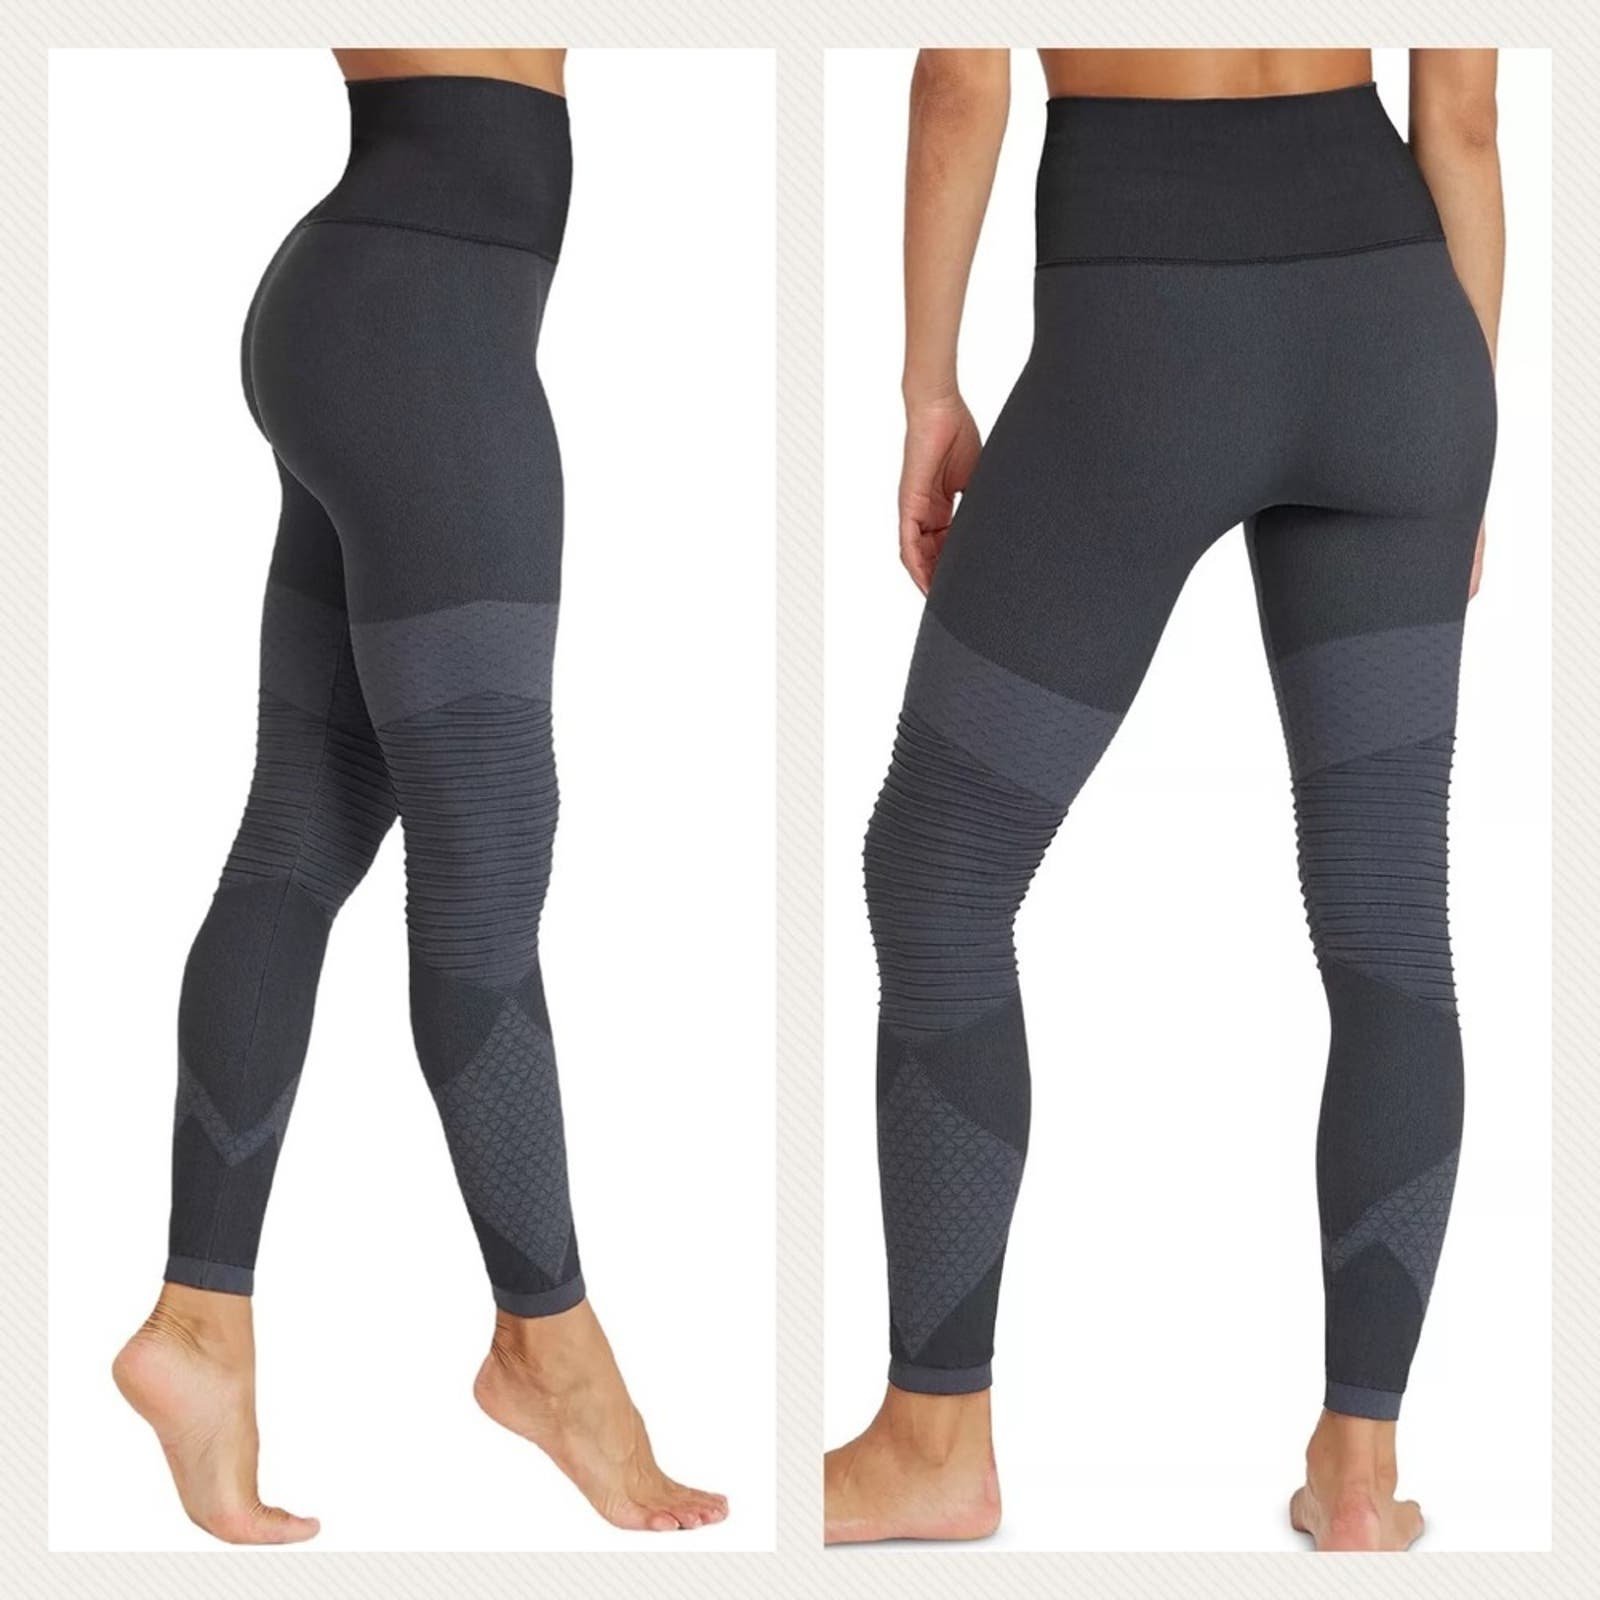 Classic Spanx The Look At Me Now Seamless Moto Leggings In Indigo Sky Size M gdTm1bOMu High Quaity